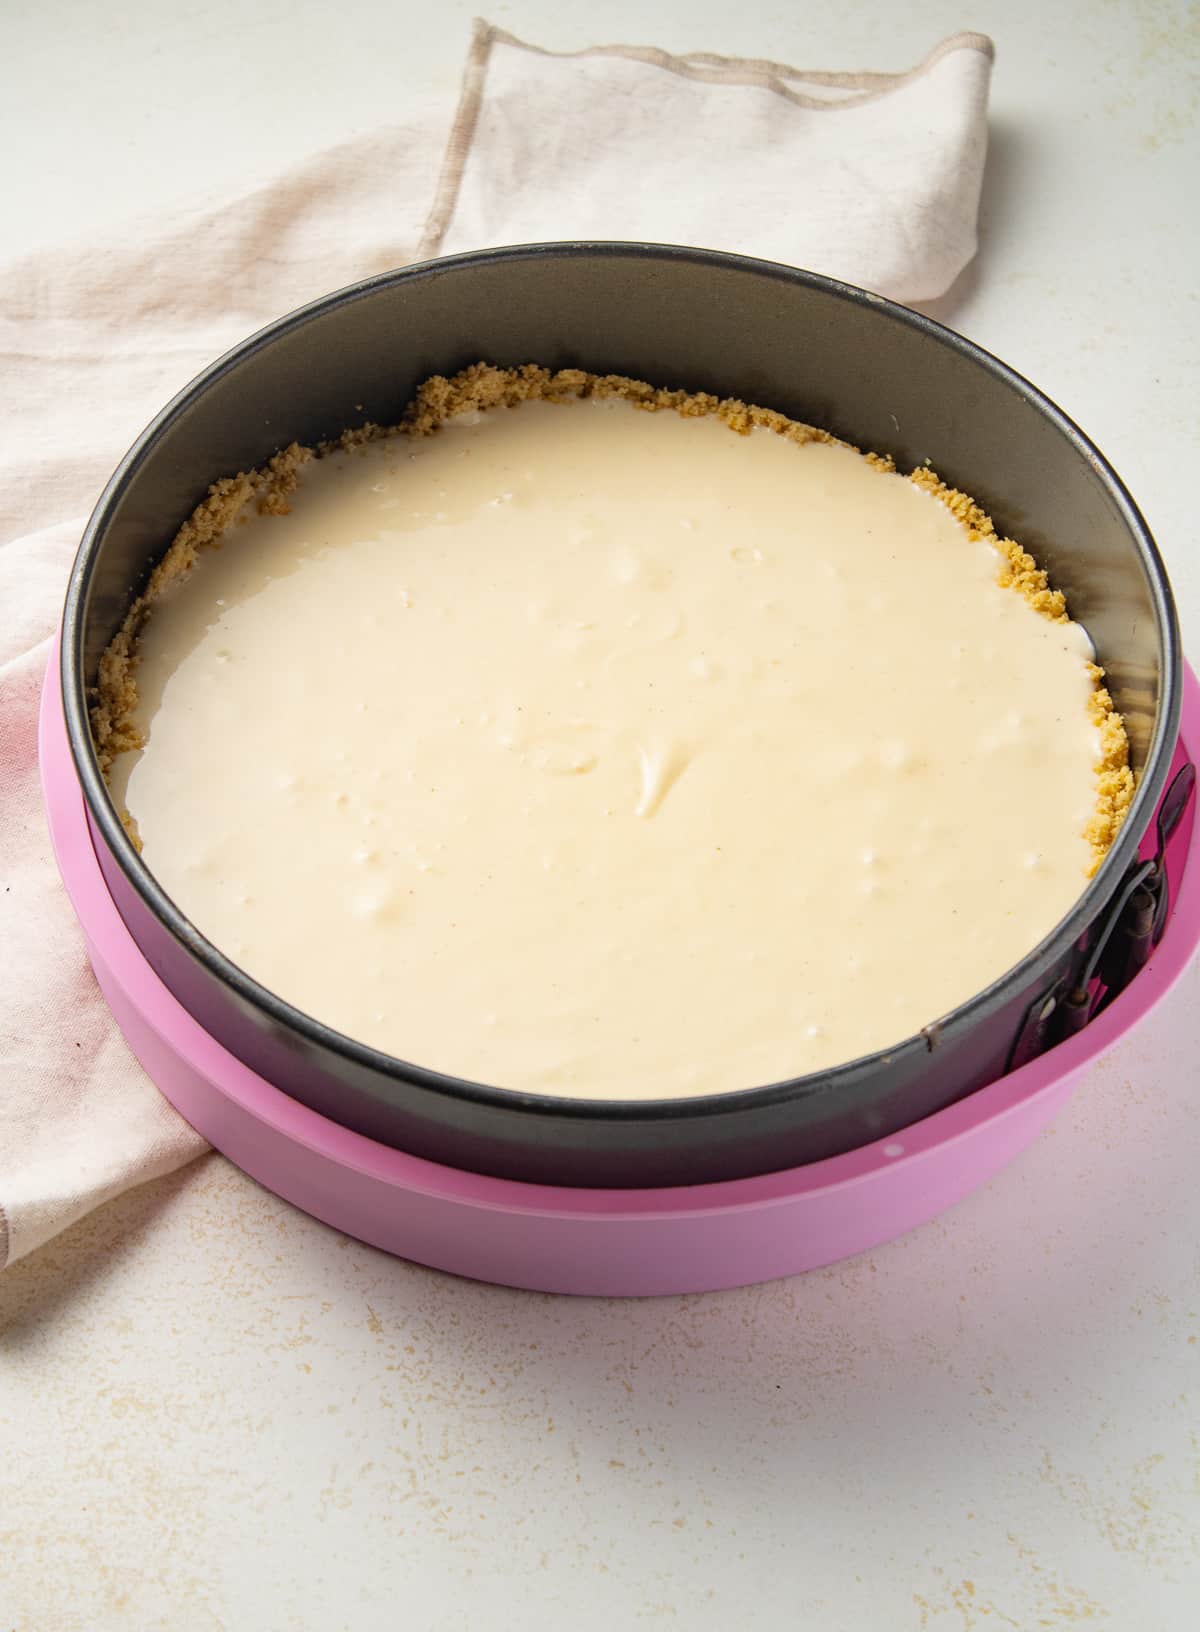 Cheesecake batter in a springform pan in a silicone sleeve on the counter.